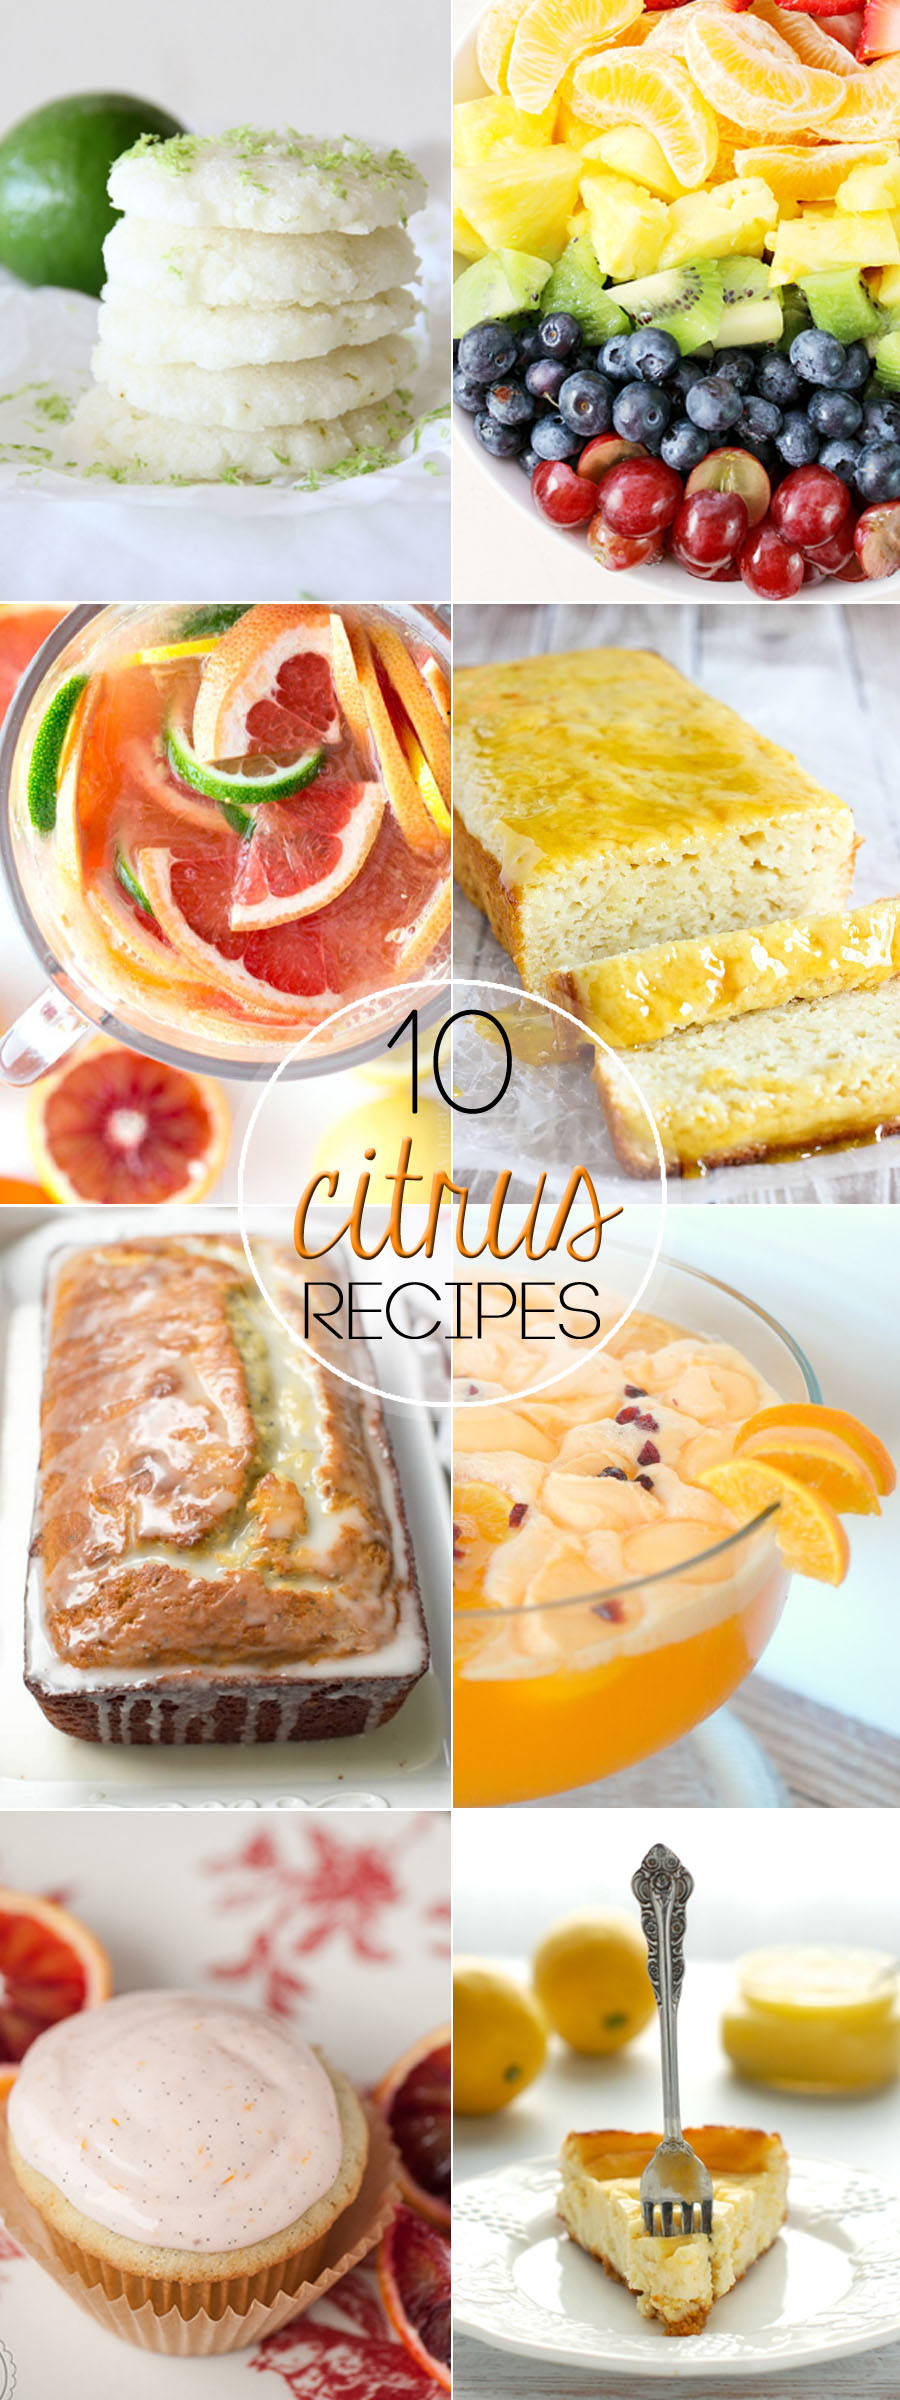 Spring is the perfect time for a delicious citrus recipe! I've gathered 10 beautiful citrus recipes to help use up all the perfectly ripe citrus.